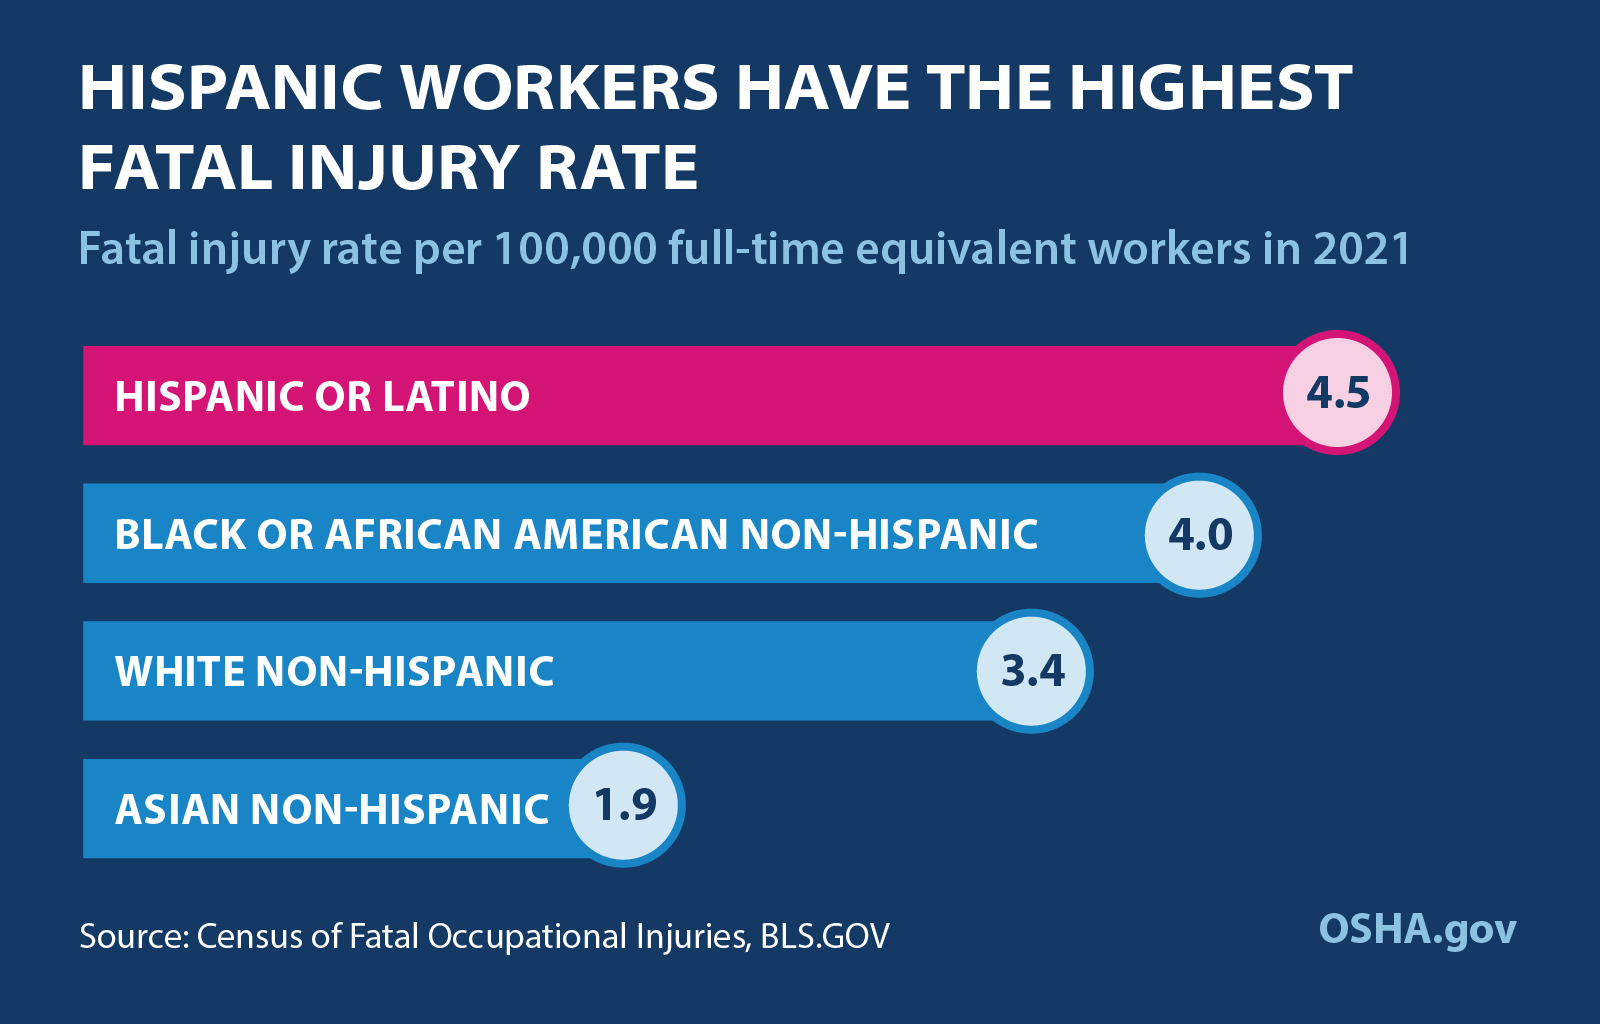 Chart showing that Hispanic workers have the highest fatal injury rate among demographics. The fatal injury rate per 100,000 full-time equivalent workers in 2021 was 4.5 for Hispanics or Latinos, 4.0 for Black or African American Non-Hispanics, 3.4 for White Non-Hispanics, and 1.9 for Asian Non-Hispanics. Source: Census of Fatal Occupational Injuries, BLS.gov